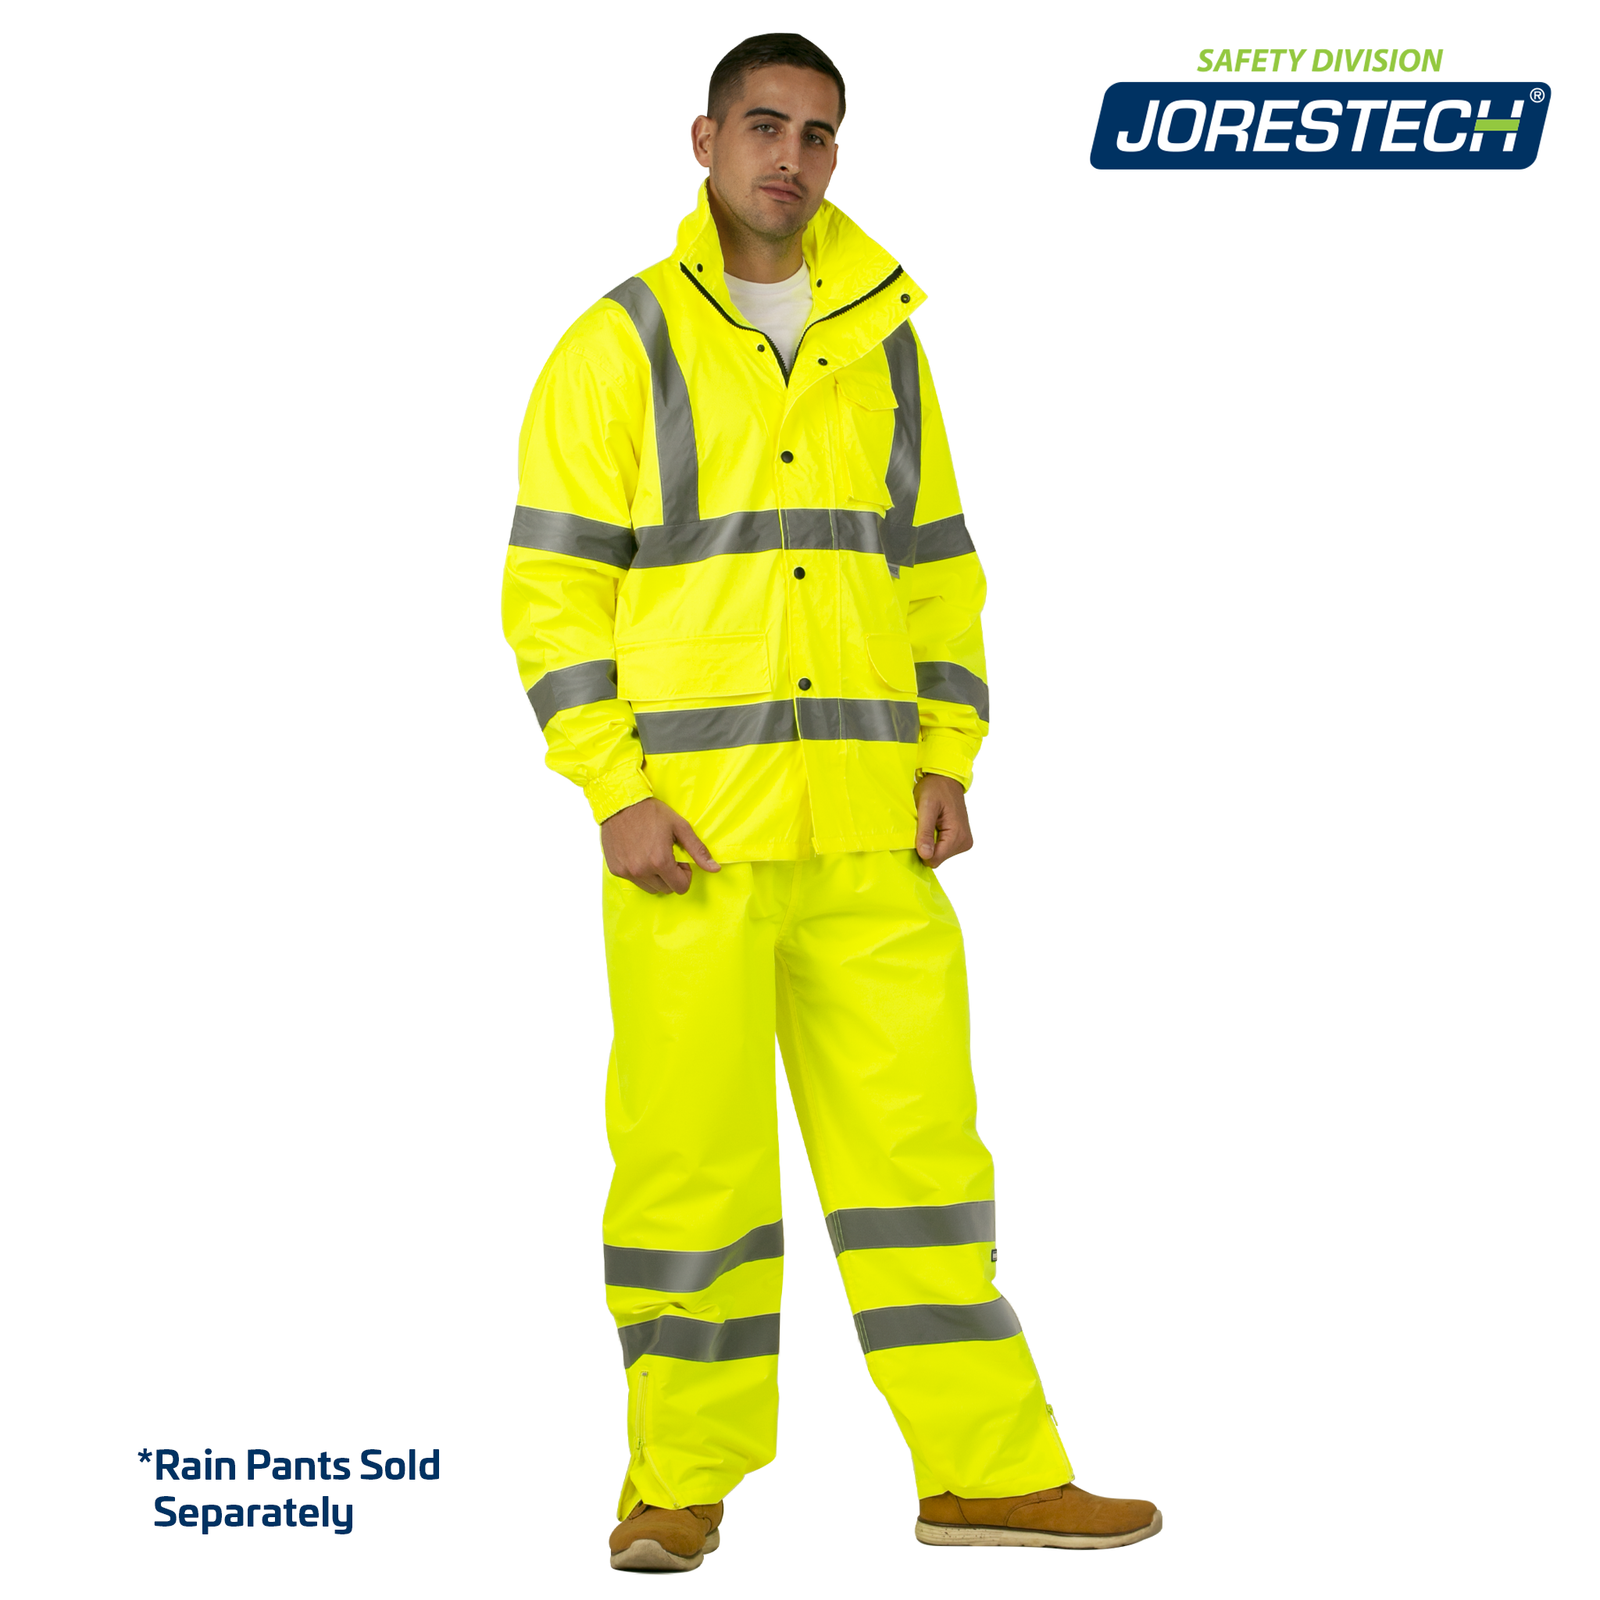 Man wearing the high visibility yellow rain jacket with reflective strips and pants. Small text reads 